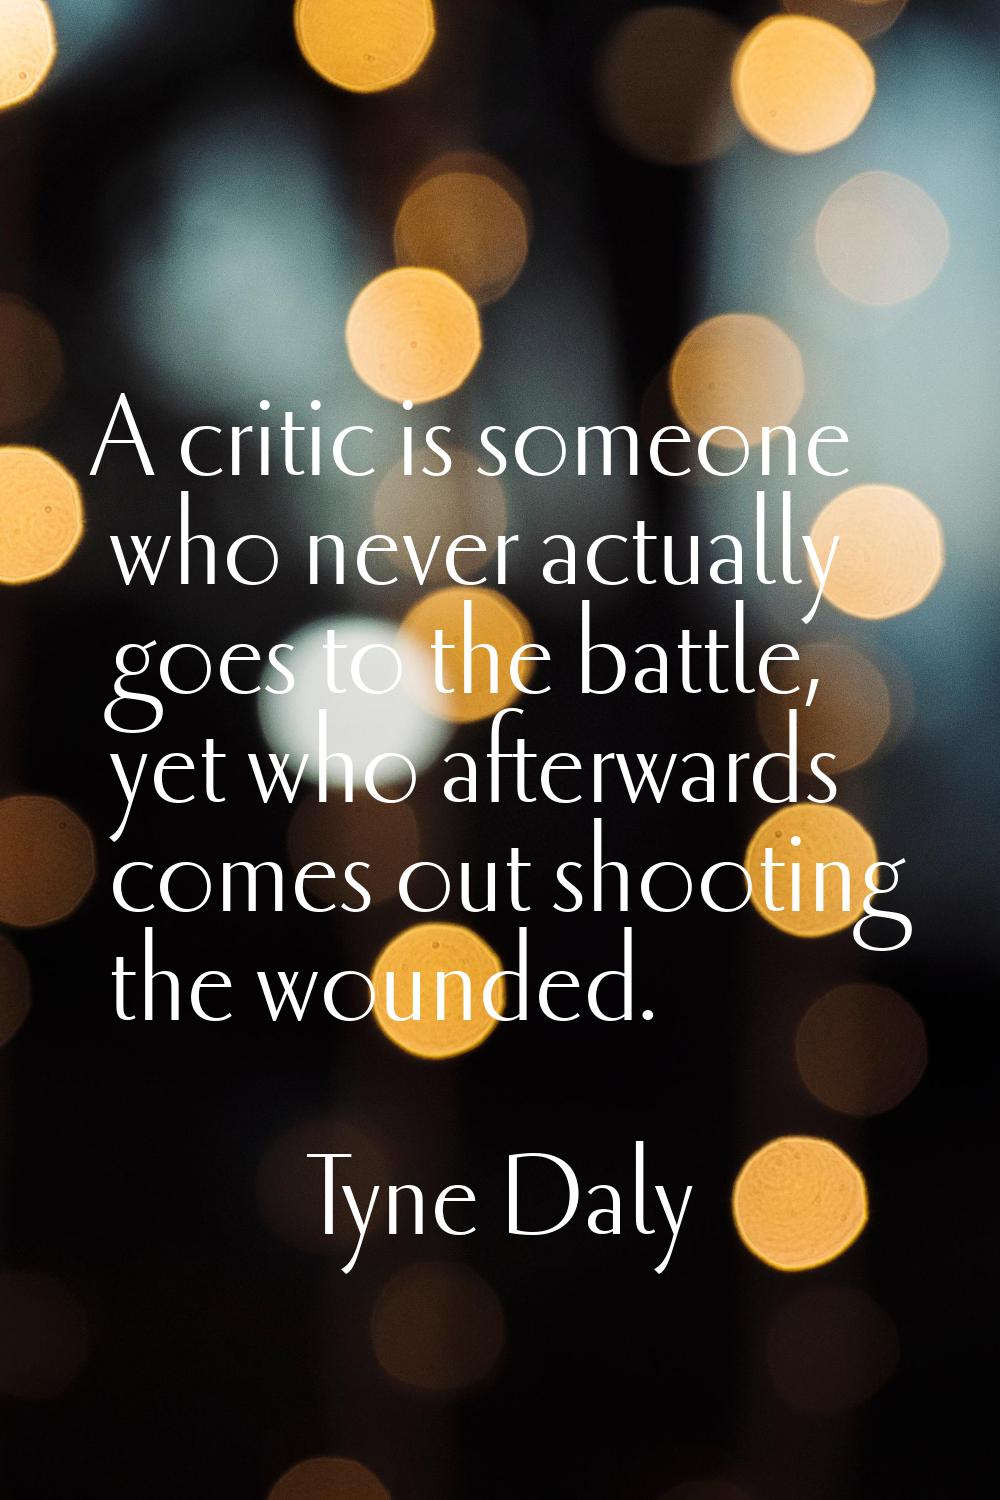 A critic is someone who never actually goes to the battle, yet who afterwards comes out shooting th